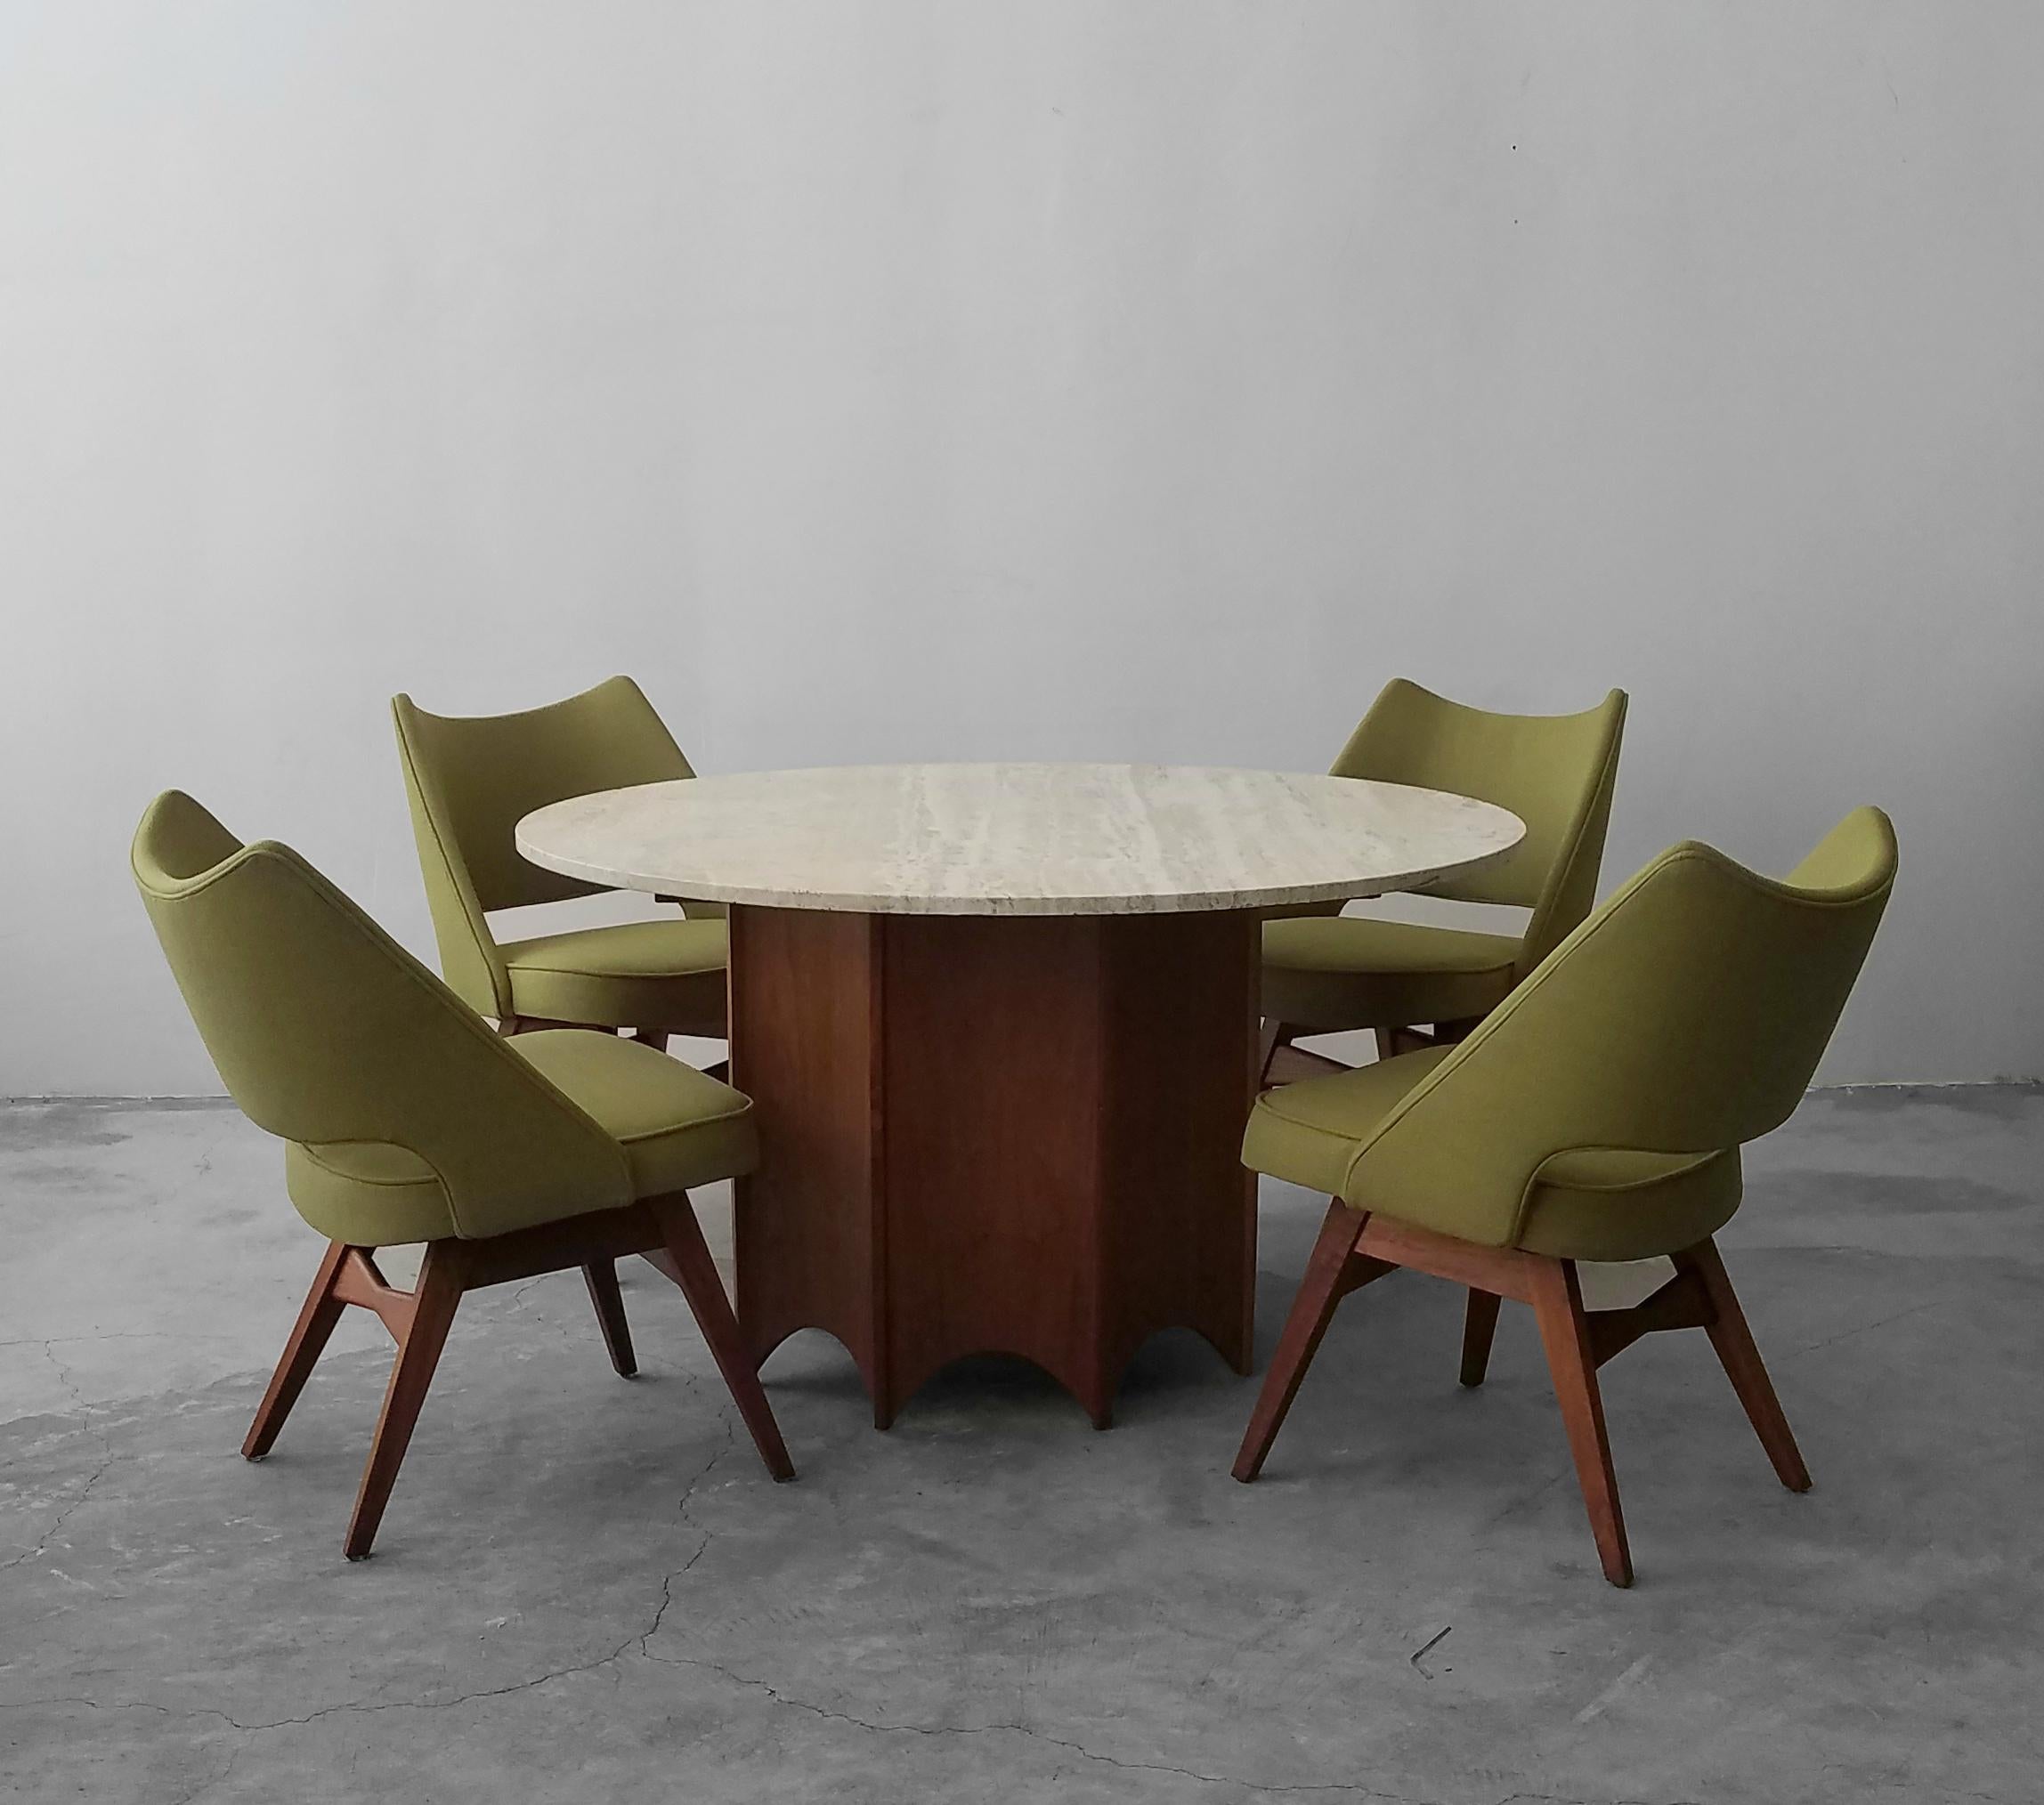 A beautiful Classic midcentury set. This gorgeous Travertine and walnut game table and chairs set by Harvey Probber is a must for any true midcentury enthusiast or anyone looking for a game table that has timeless class and style. The set includes